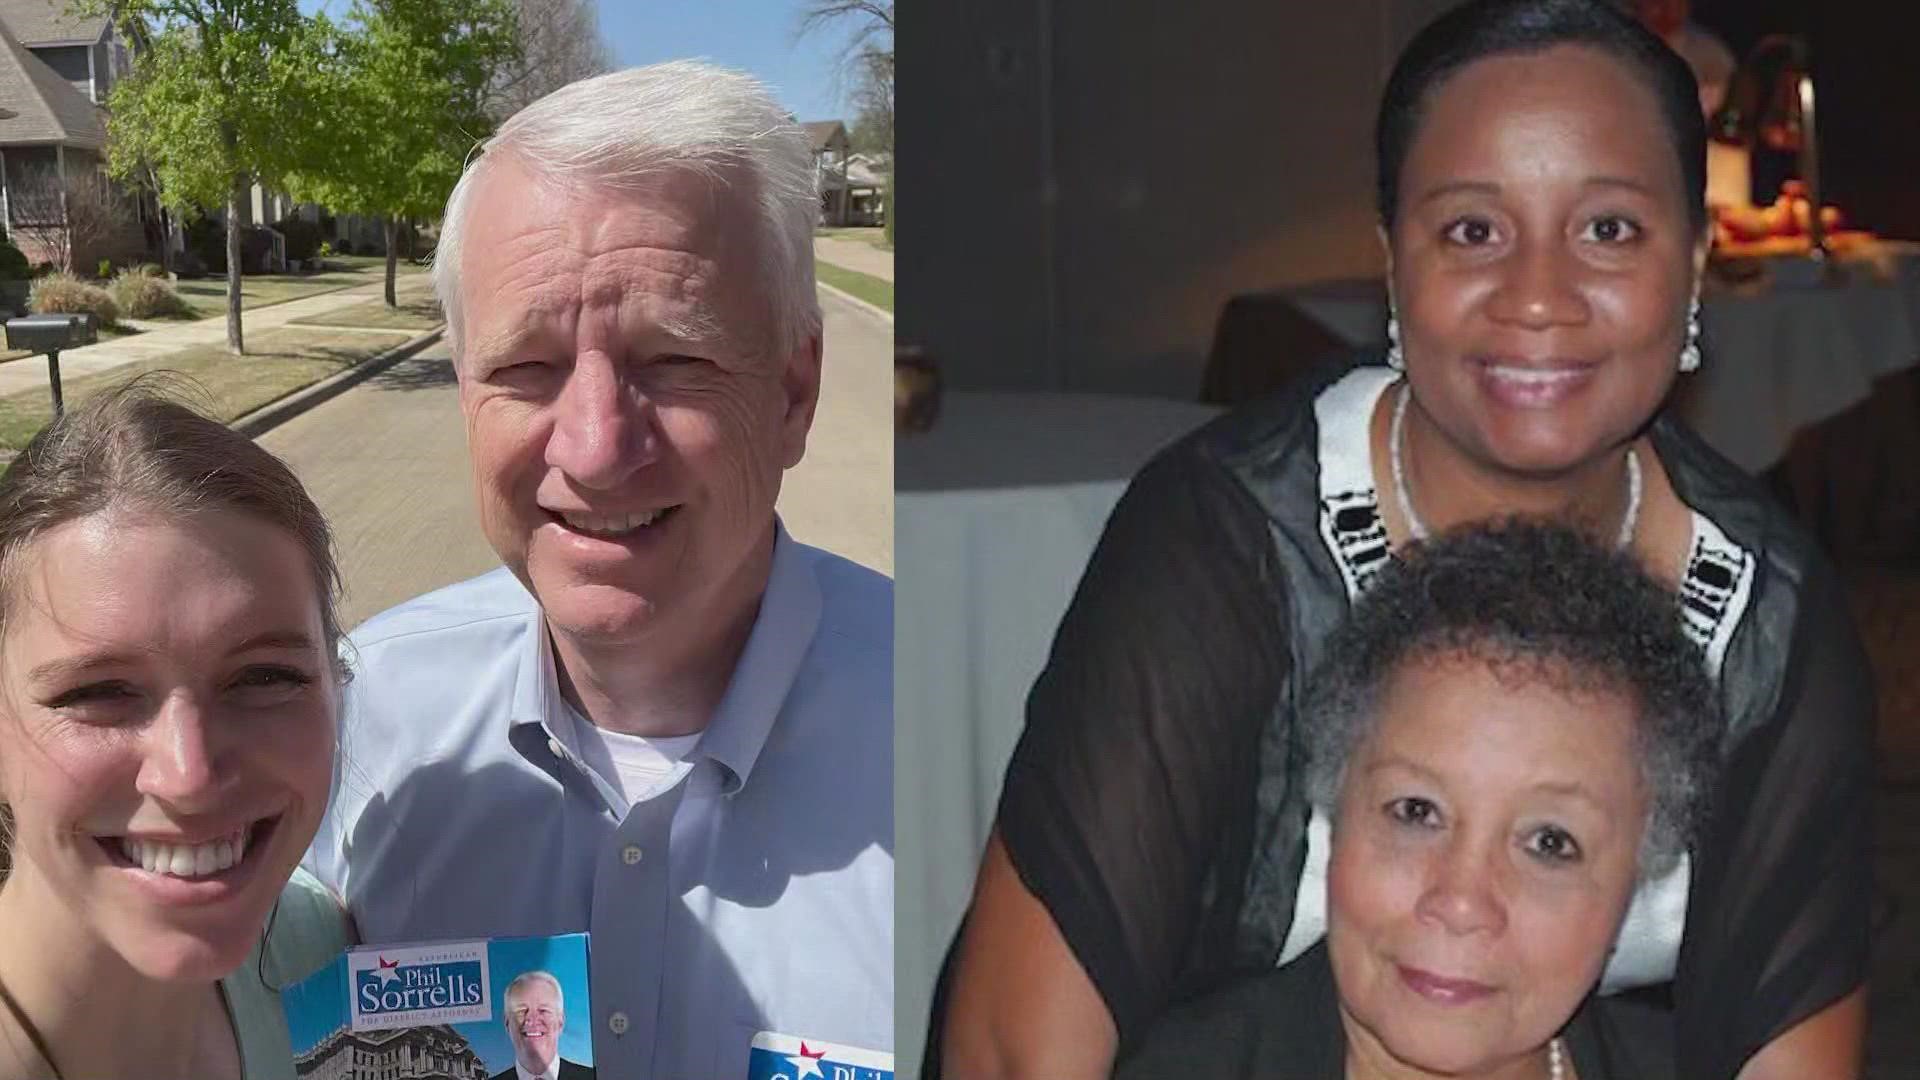 Both former assistant DA Tiffany Burks and former judge Phil Sorrells bring years of experience to the table in the race for Tarrant County district attorney.